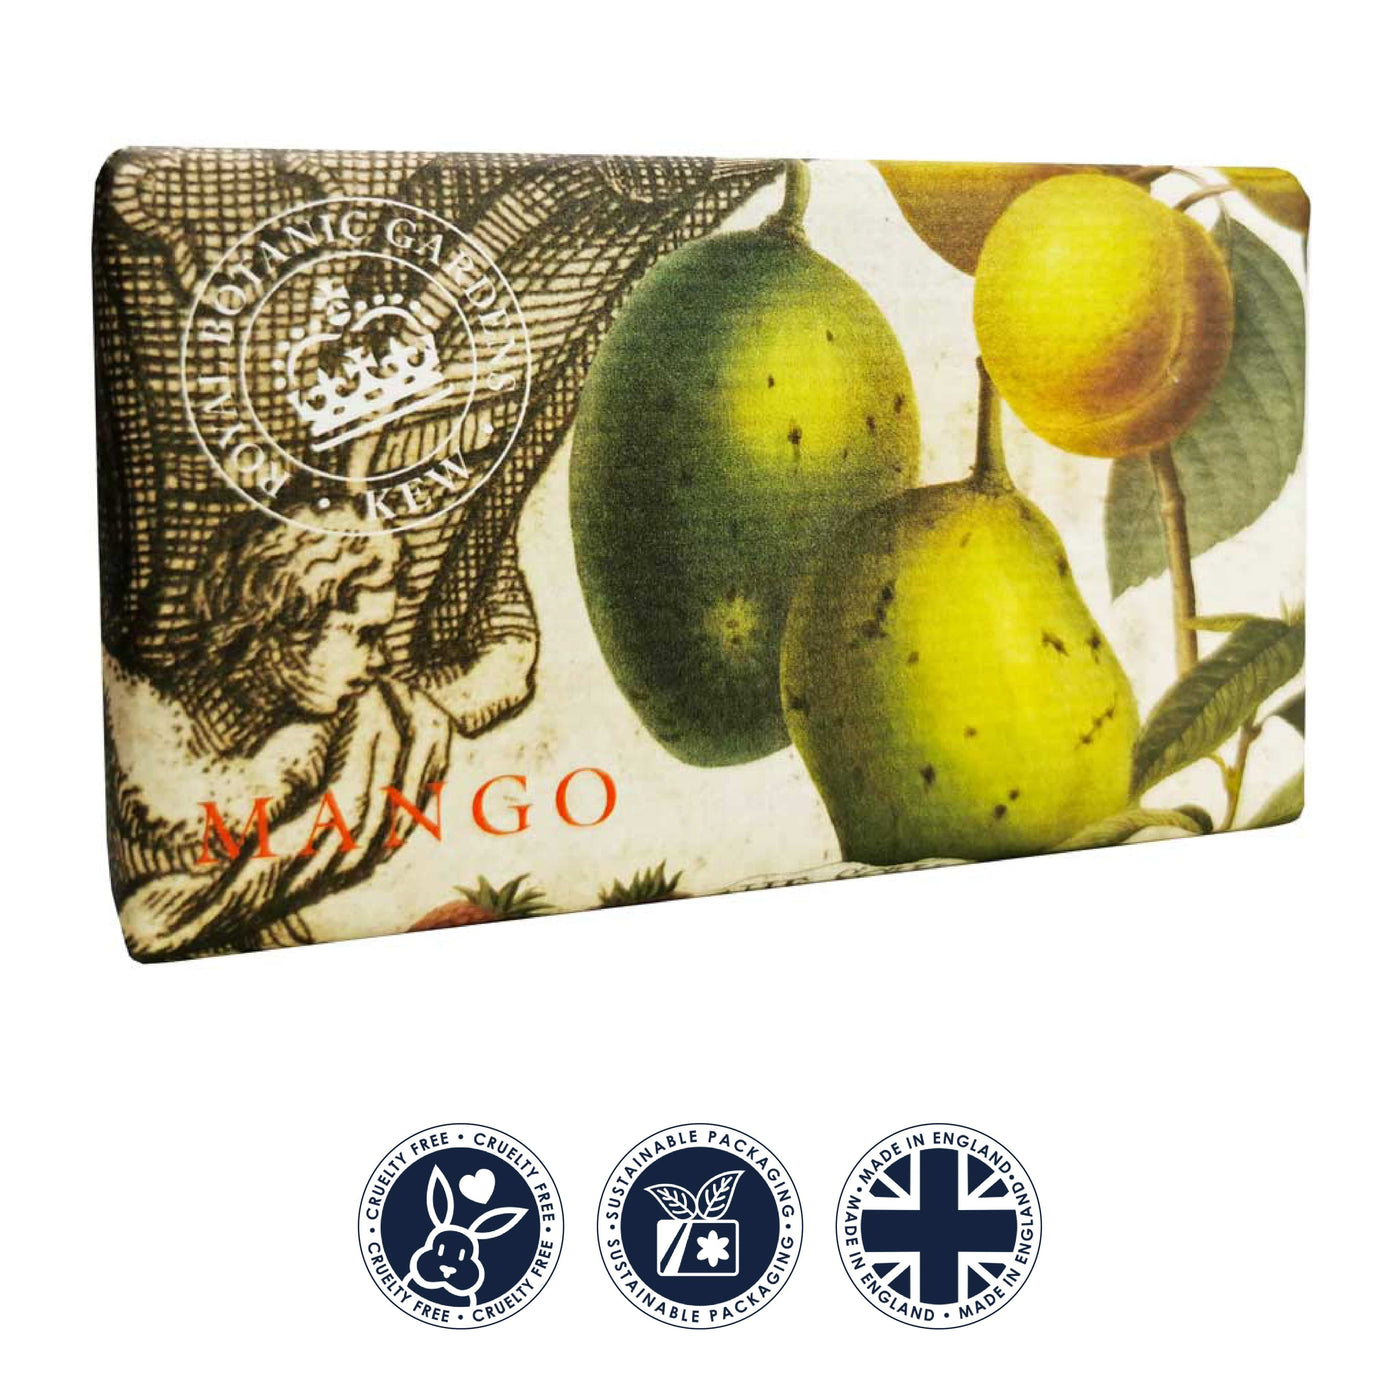 Kew Gardens Mango Soap Bar from our Luxury Bar Soap collection by The English Soap Company